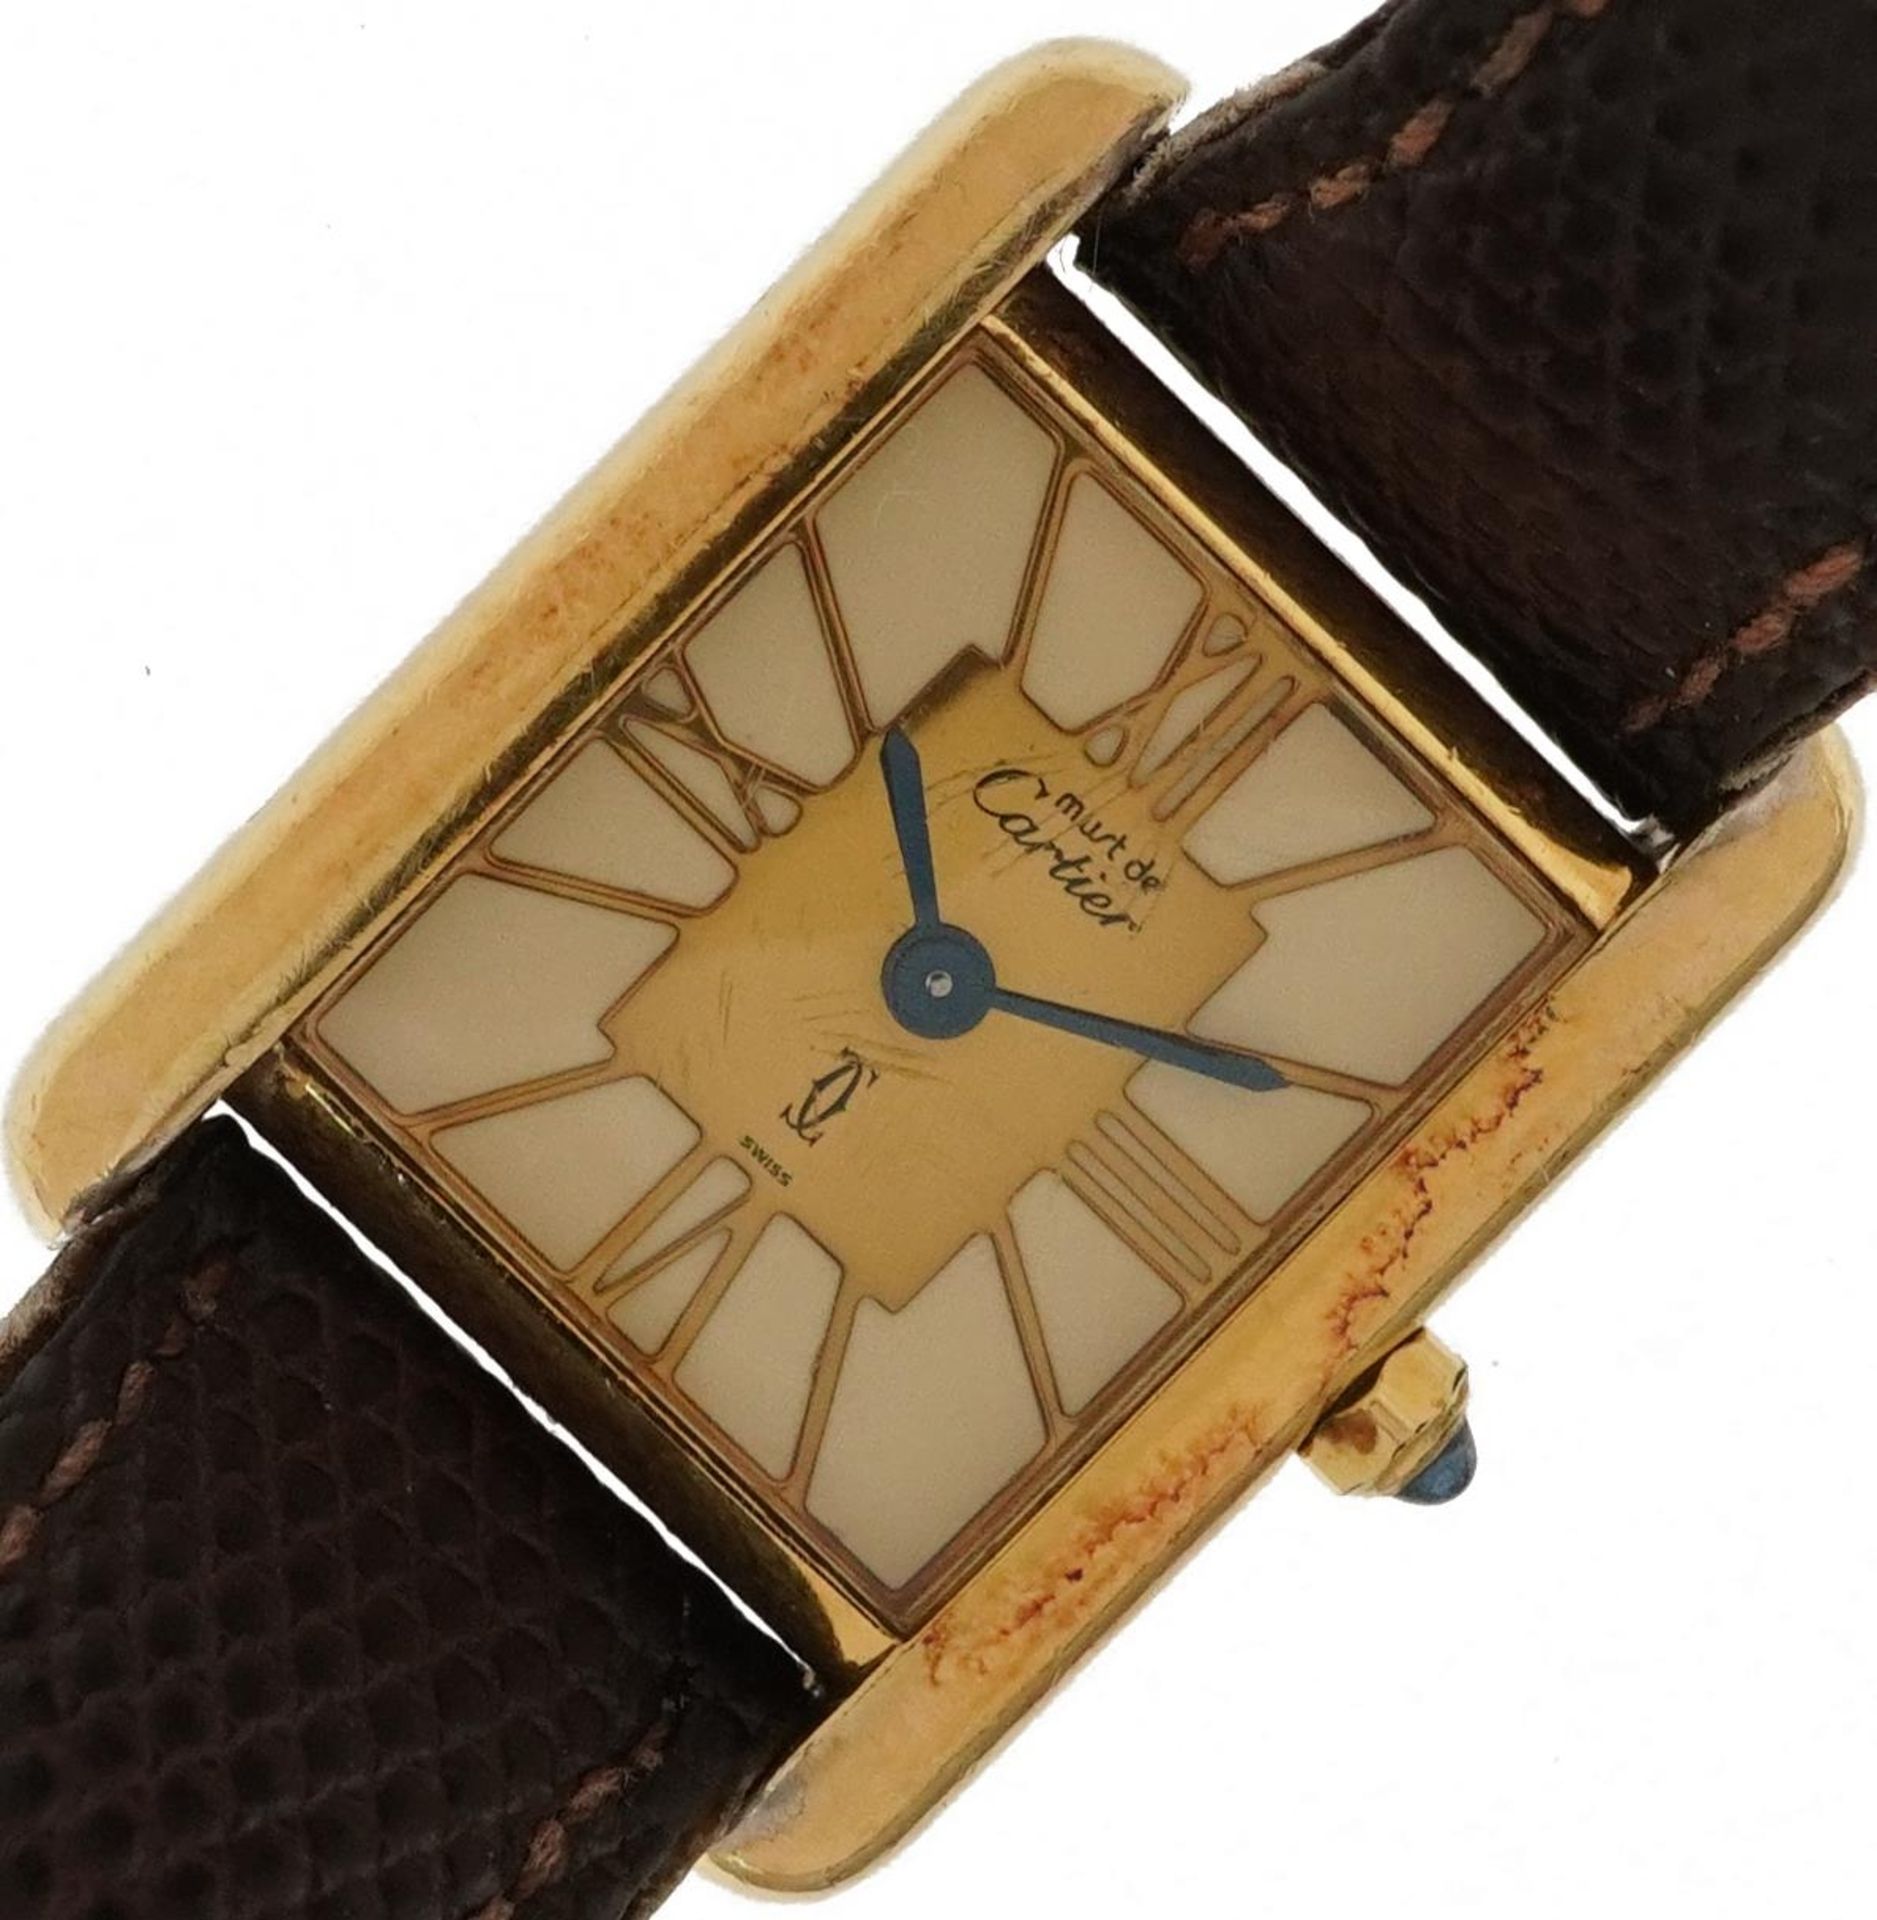 Cartier, ladies Must de Cartier silver gilt wristwatch with box and paperwork, 20mm wide : For - Image 2 of 7